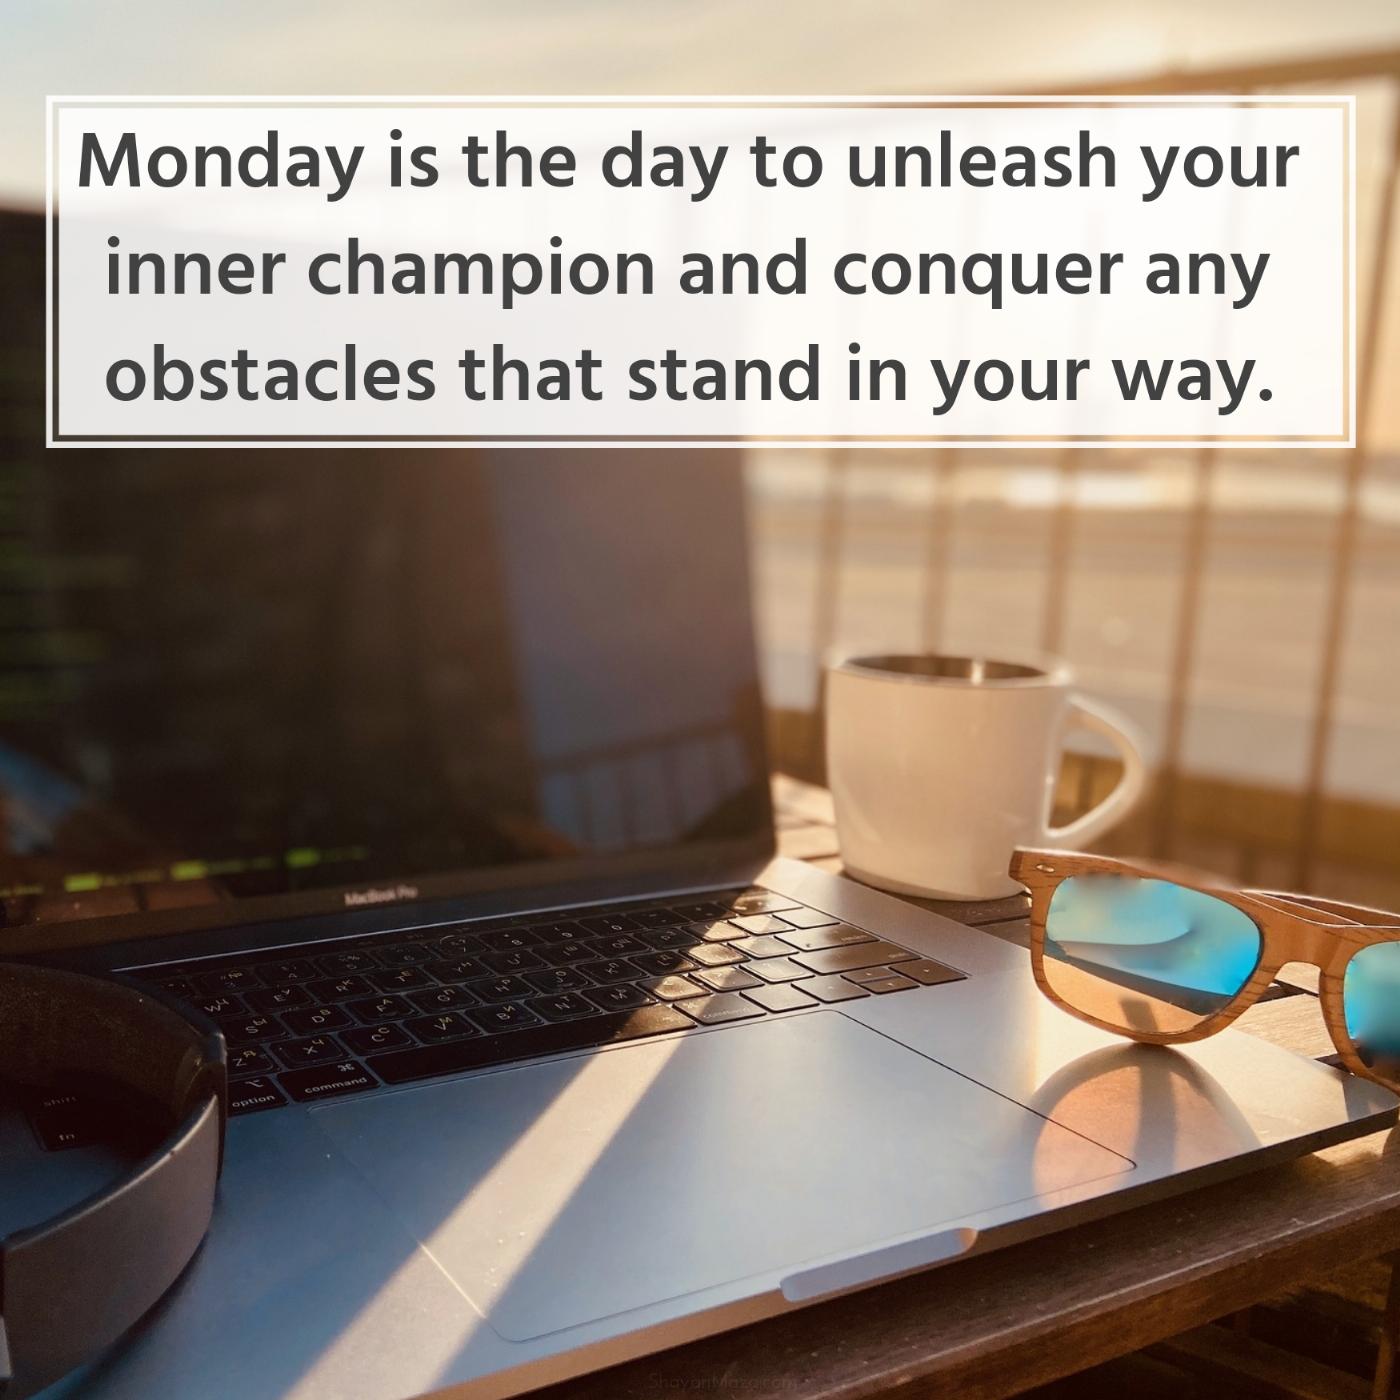 Monday is the day to unleash your inner champion